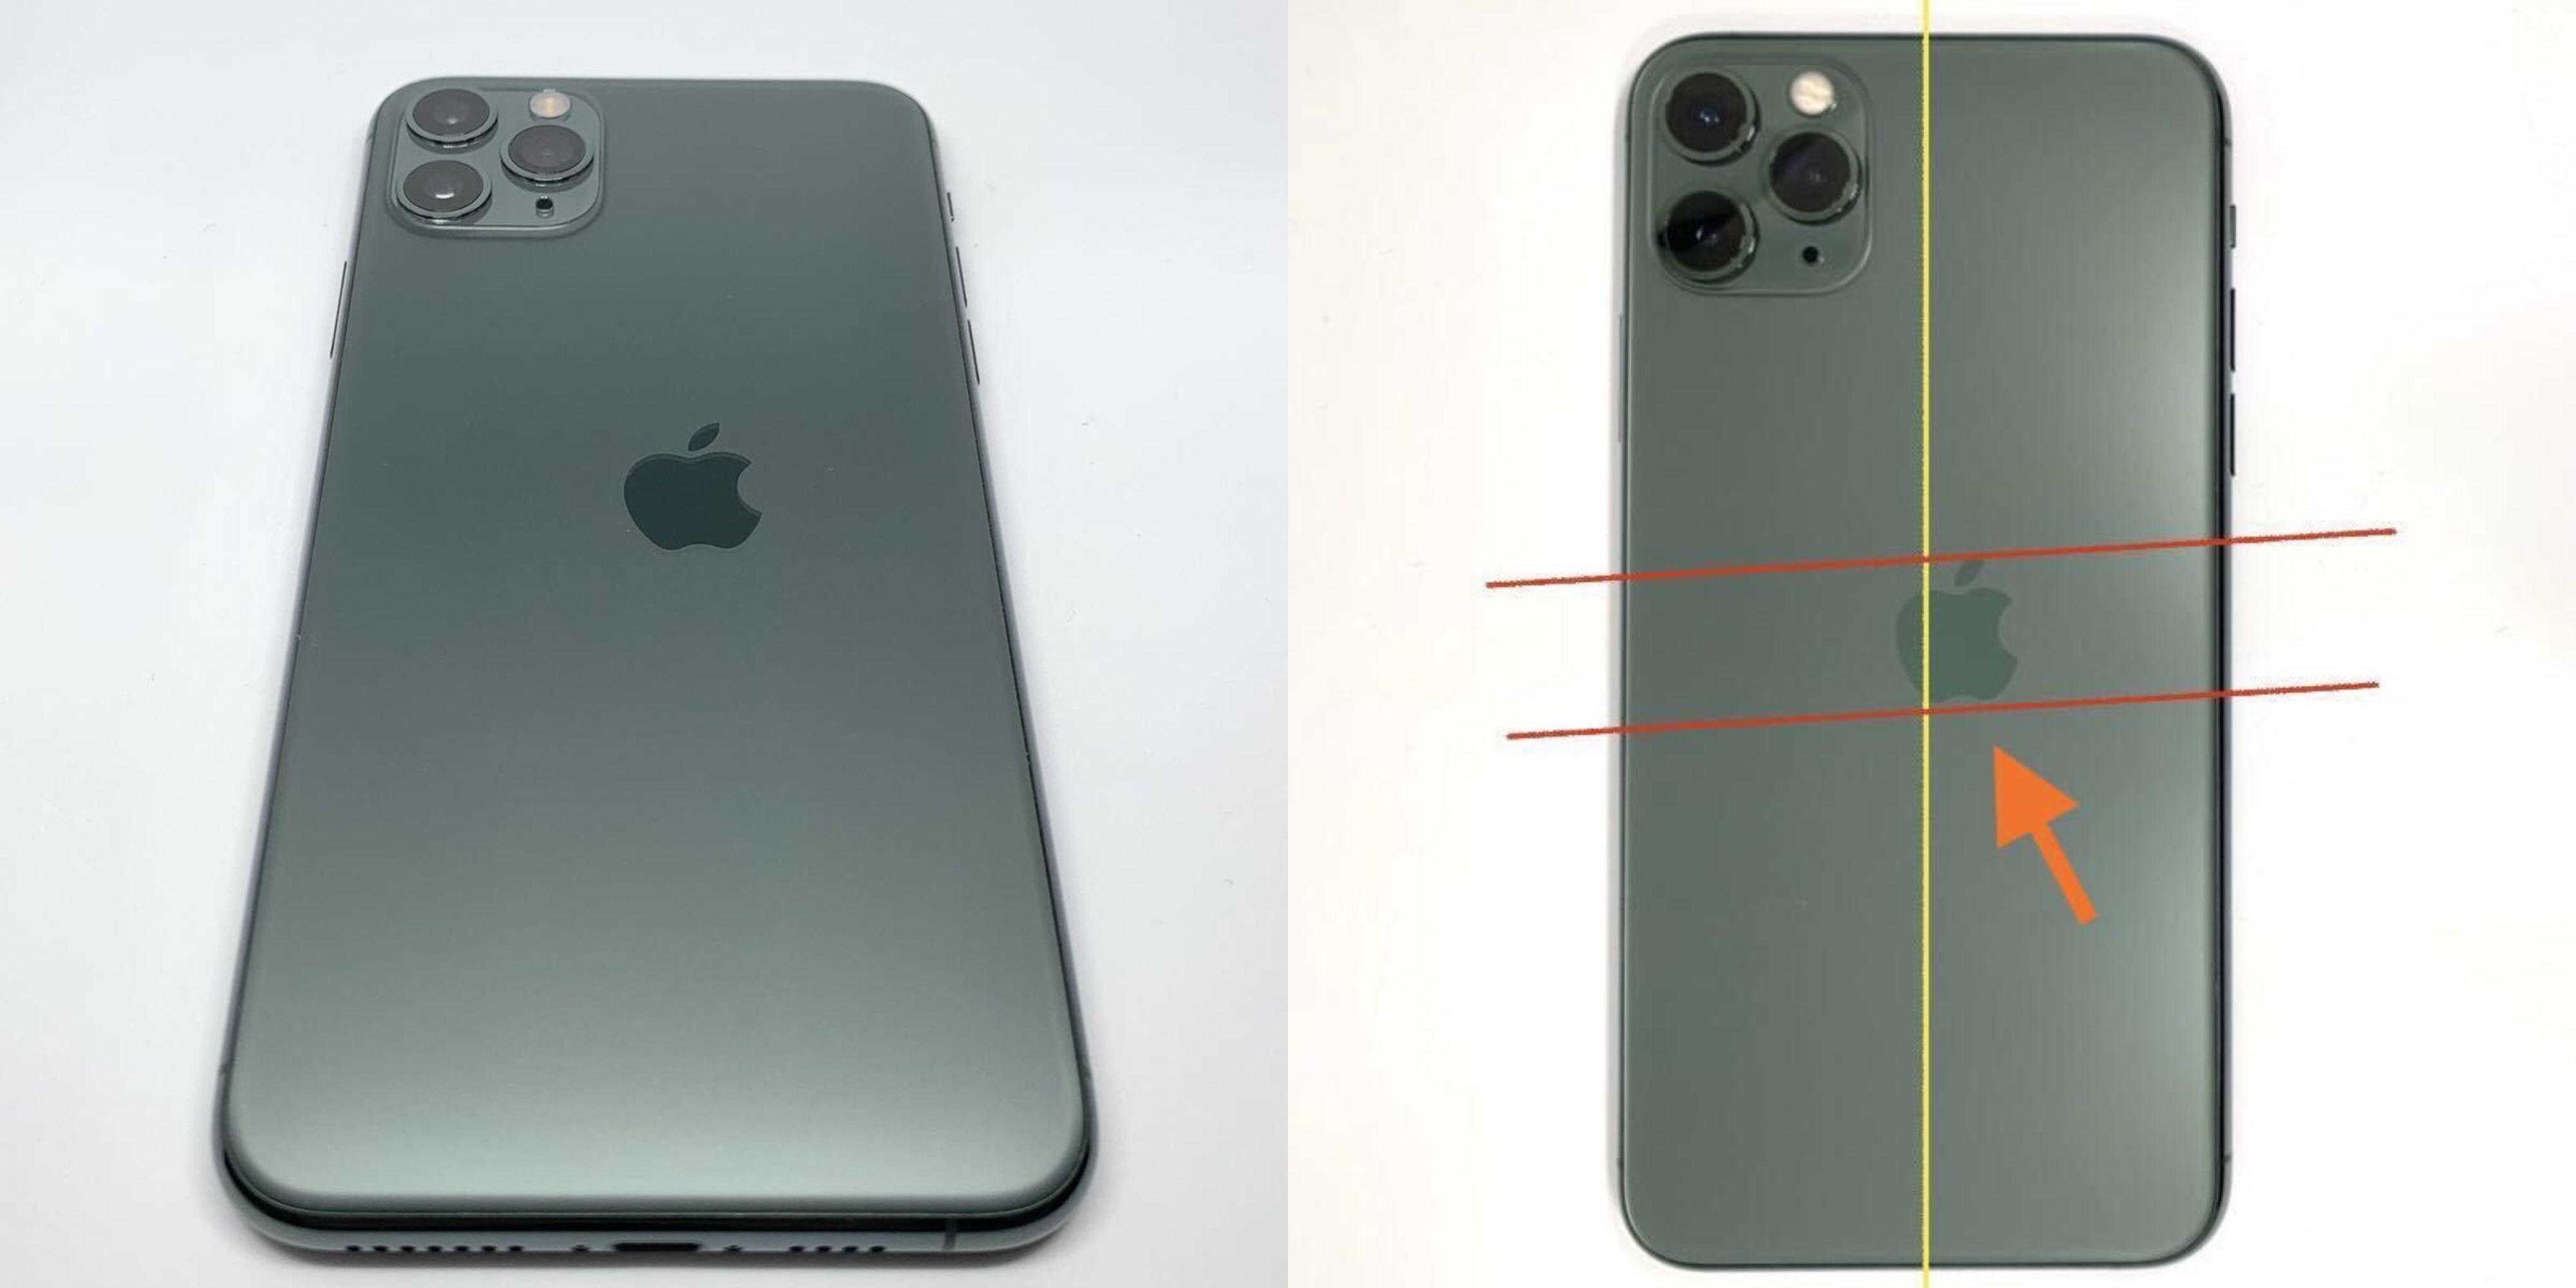 Images Show Extremely Rare Iphone 11 Pro Misprint With Misaligned Apple Logo 9to5mac